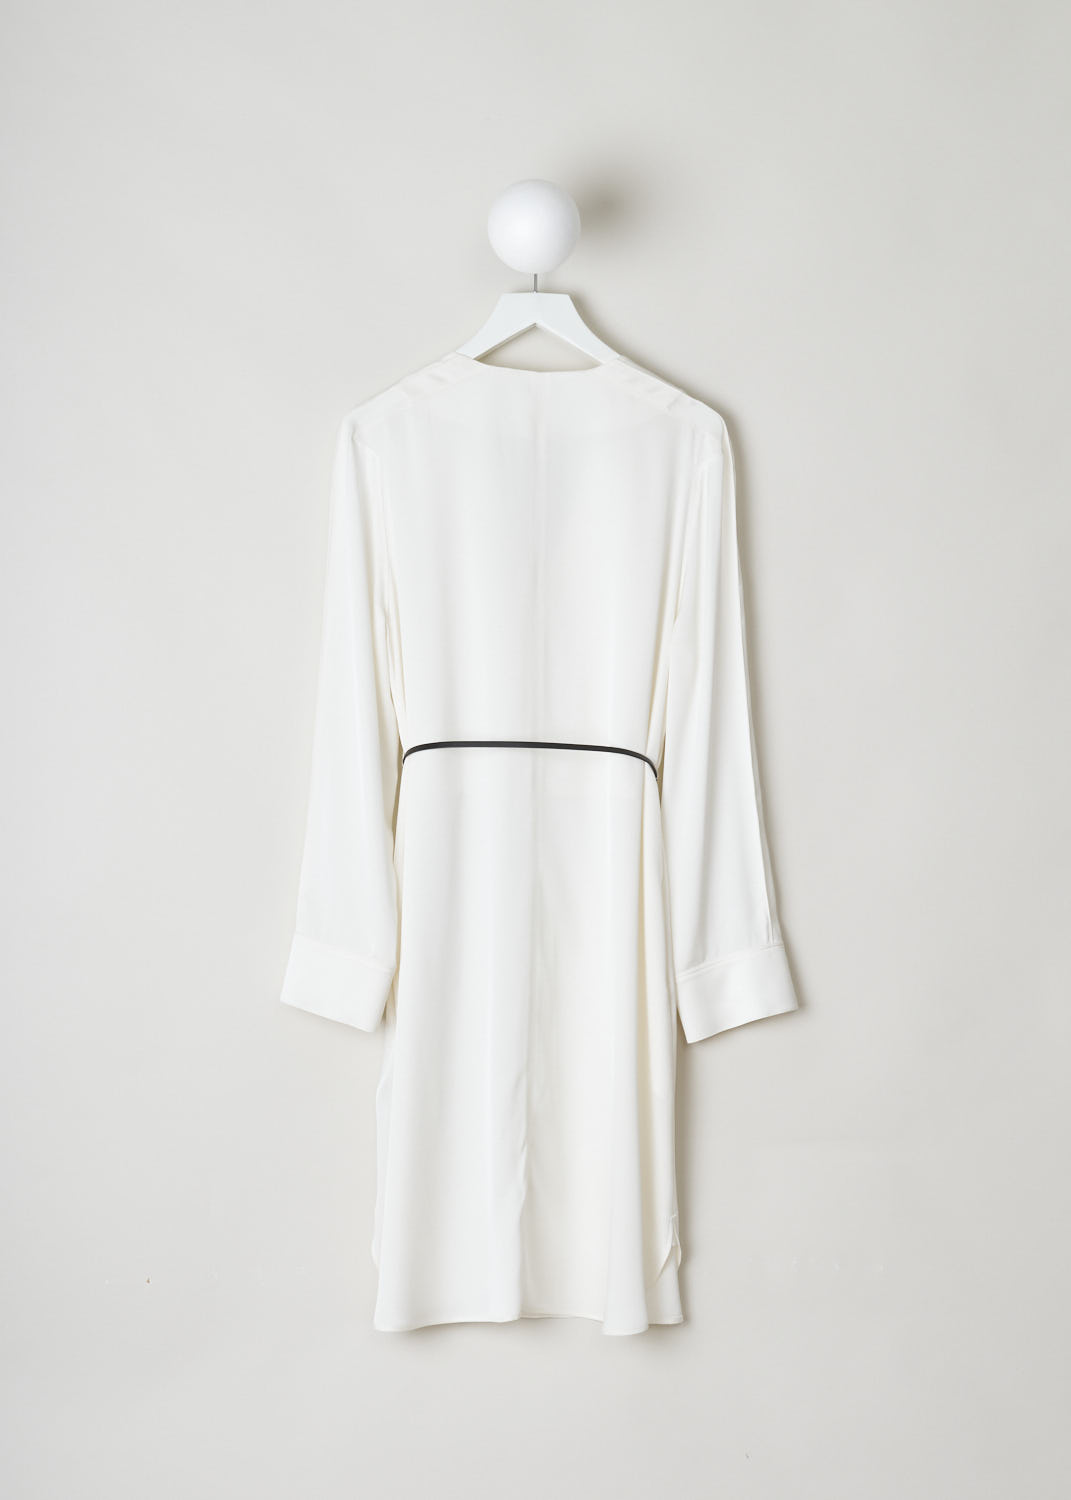 BOTTEGA VENETA, WHITE SILK DRESS WITH CONTRASTING BELT, 606454_VKJ90_8329, White, Back, This silky smooth, long sleeved dress has a deep V-neck with an exaggerated pliable collar. Across the shoulders, dainty little pleats can be found. The dress comes with a thin, contrasting black belt in leather, with its belt buckle being the recognizable gold-toned triangle.  
